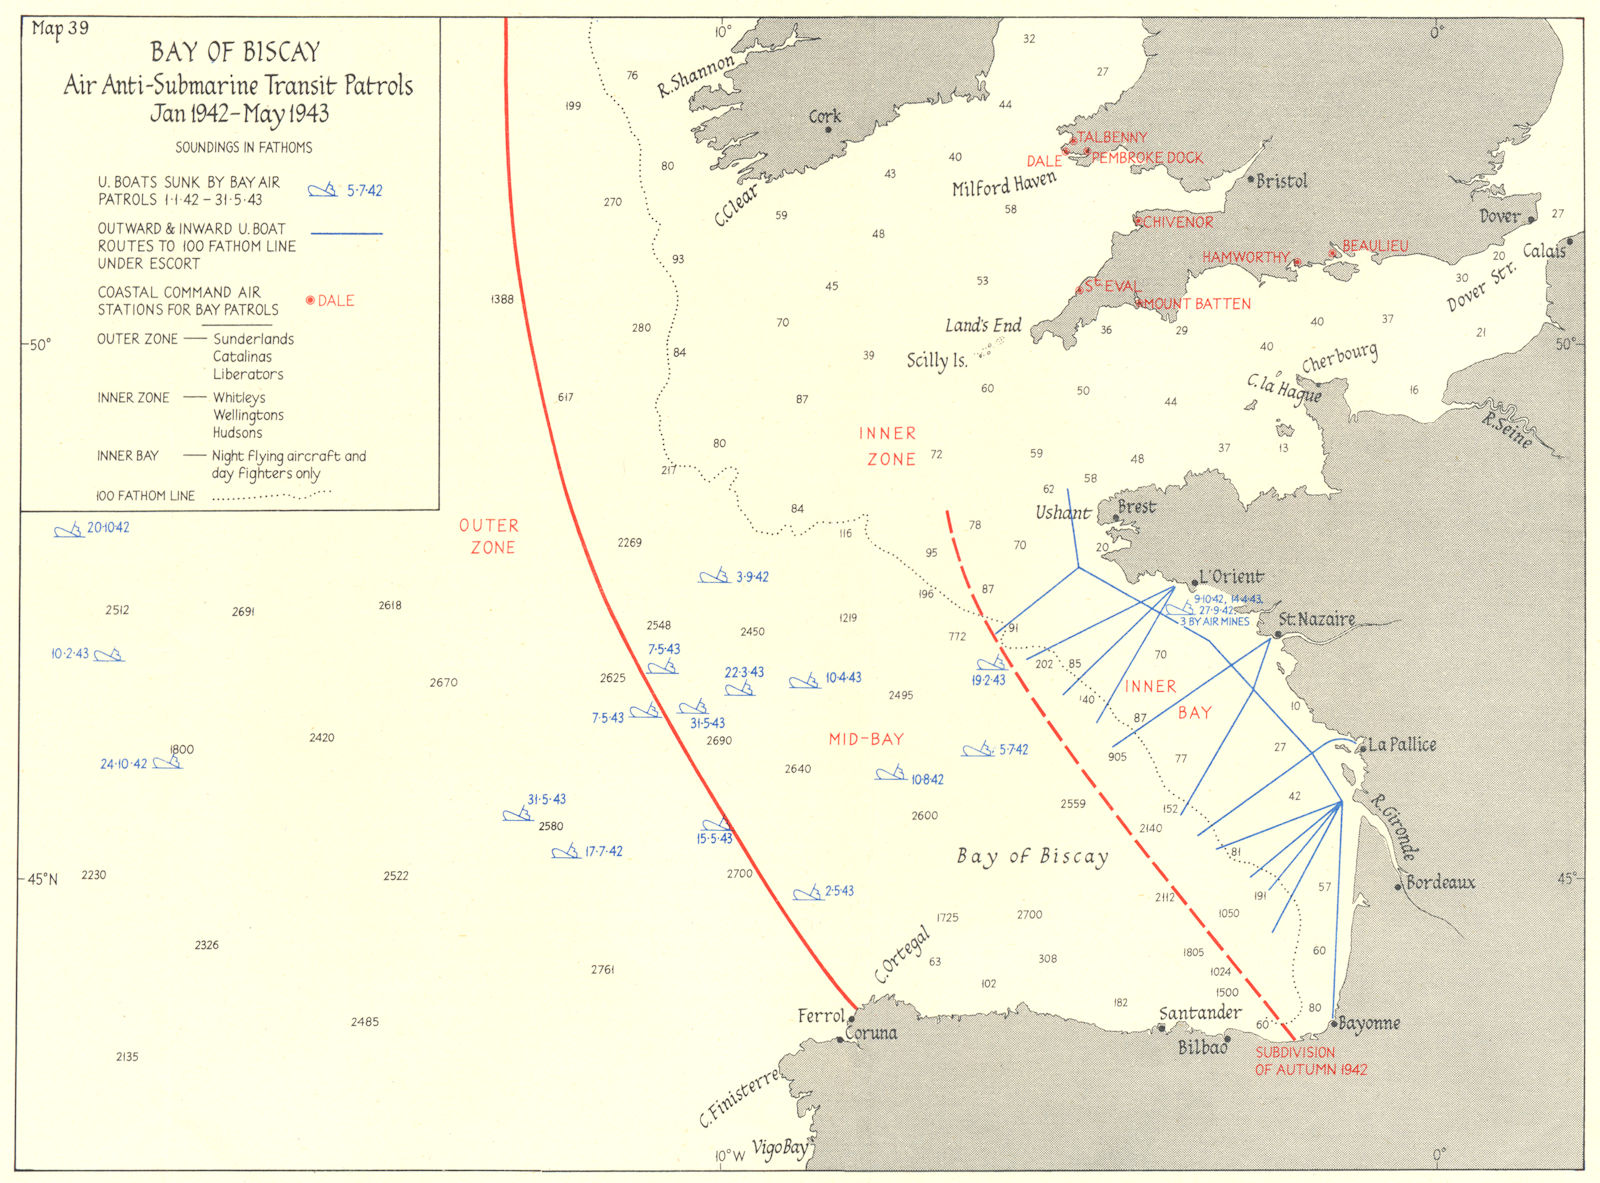 BAY OF BISCAY. Air Anti-Submarine Patrols 1942-43 1956 old vintage map chart